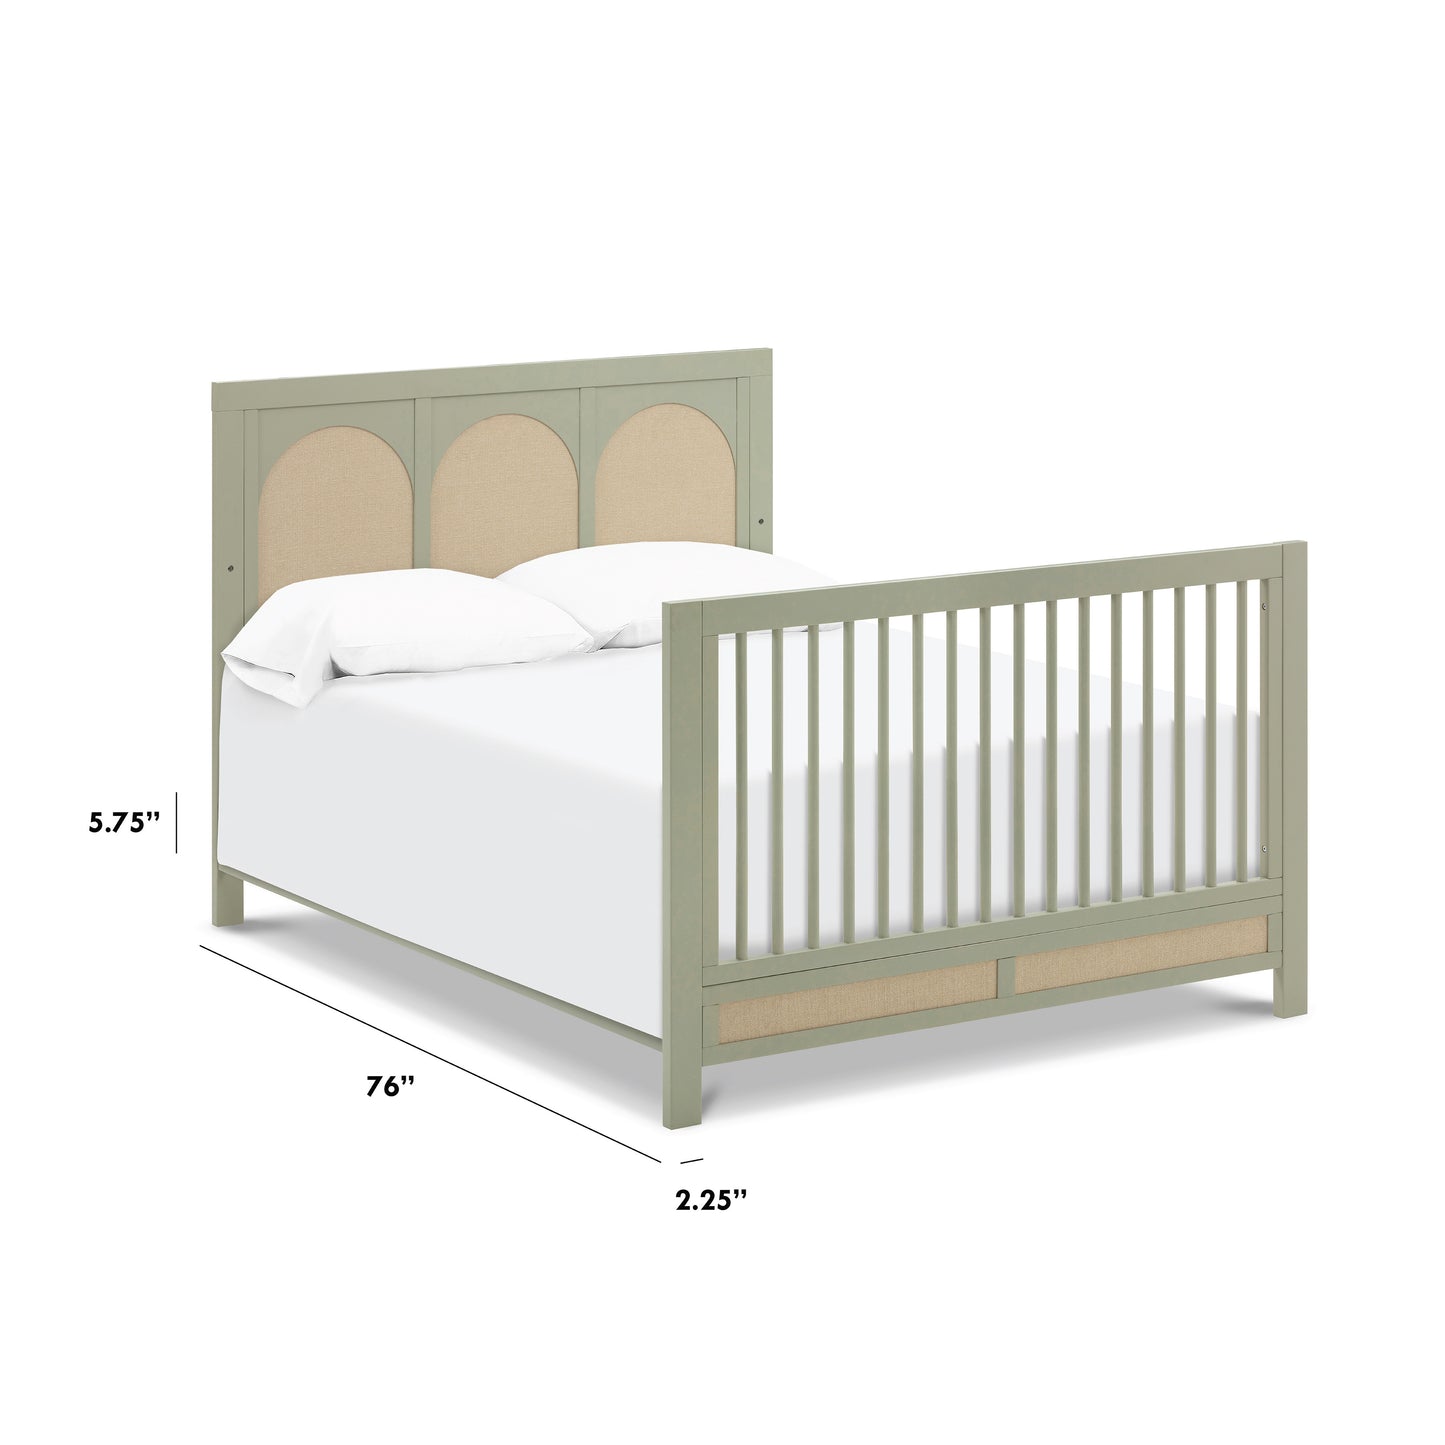 M7689FS,Full Size Bed Conversion Kit in French Sage